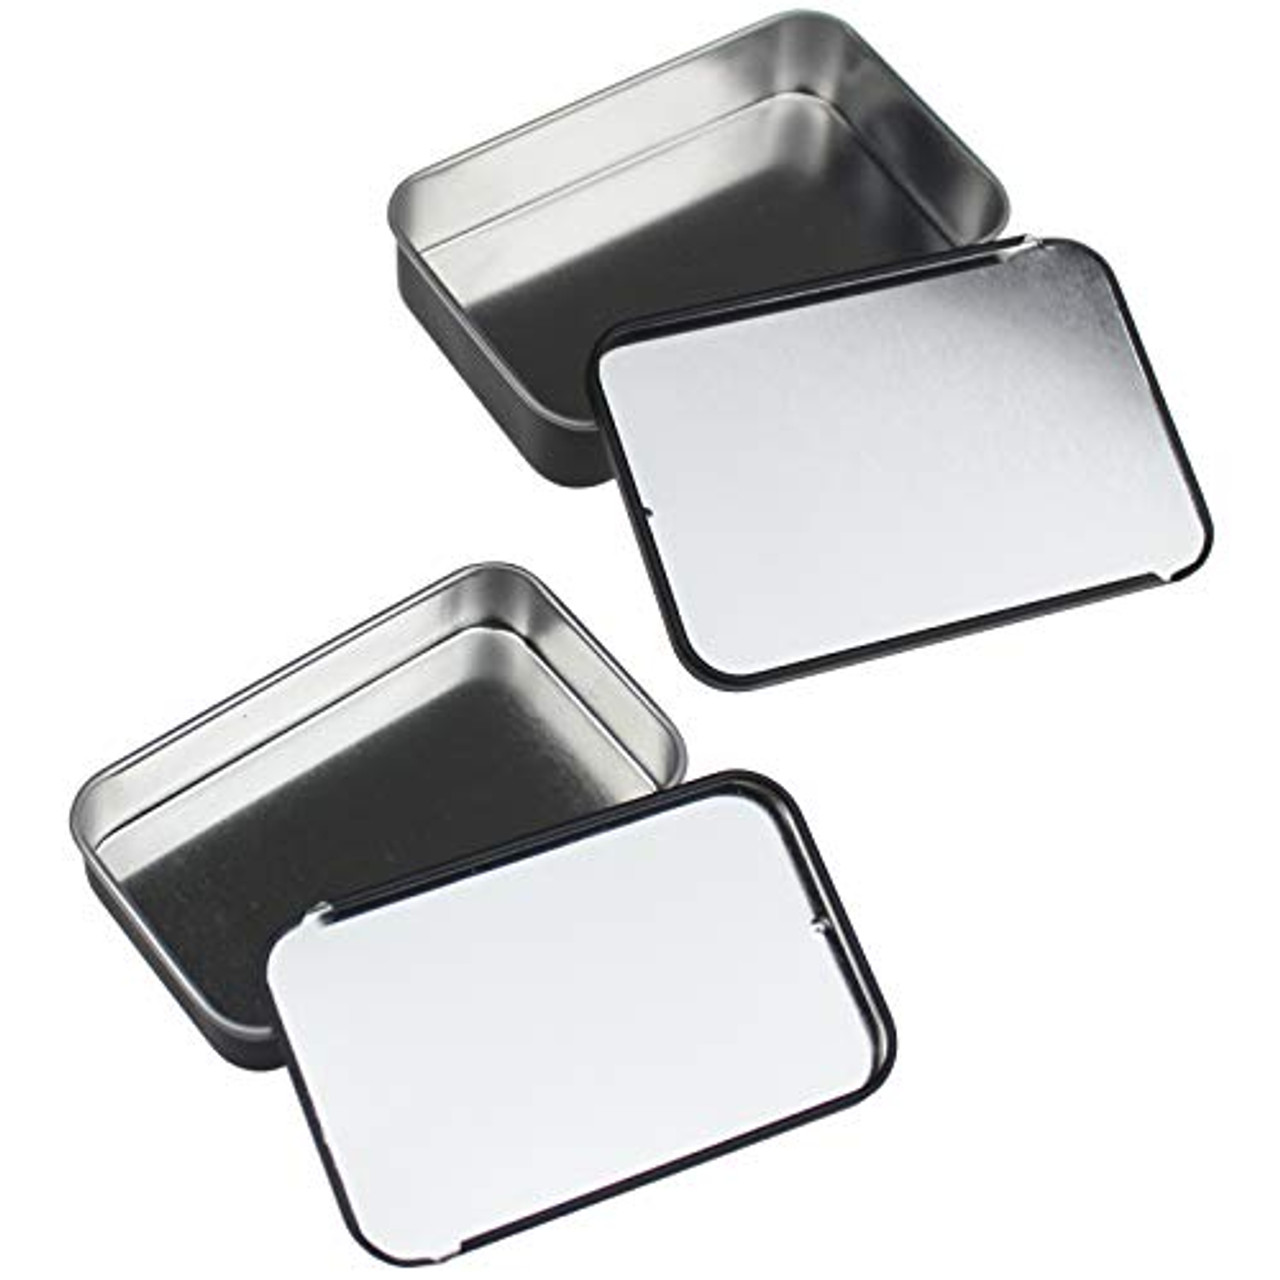 Hulless 4 Ounce Aluminum Cans 120 mL Transparent Top Screw Lid Metal  Storage Tins Containers for Storing Spices, Candies, Lip Balm, Candles, 12  Pcs.